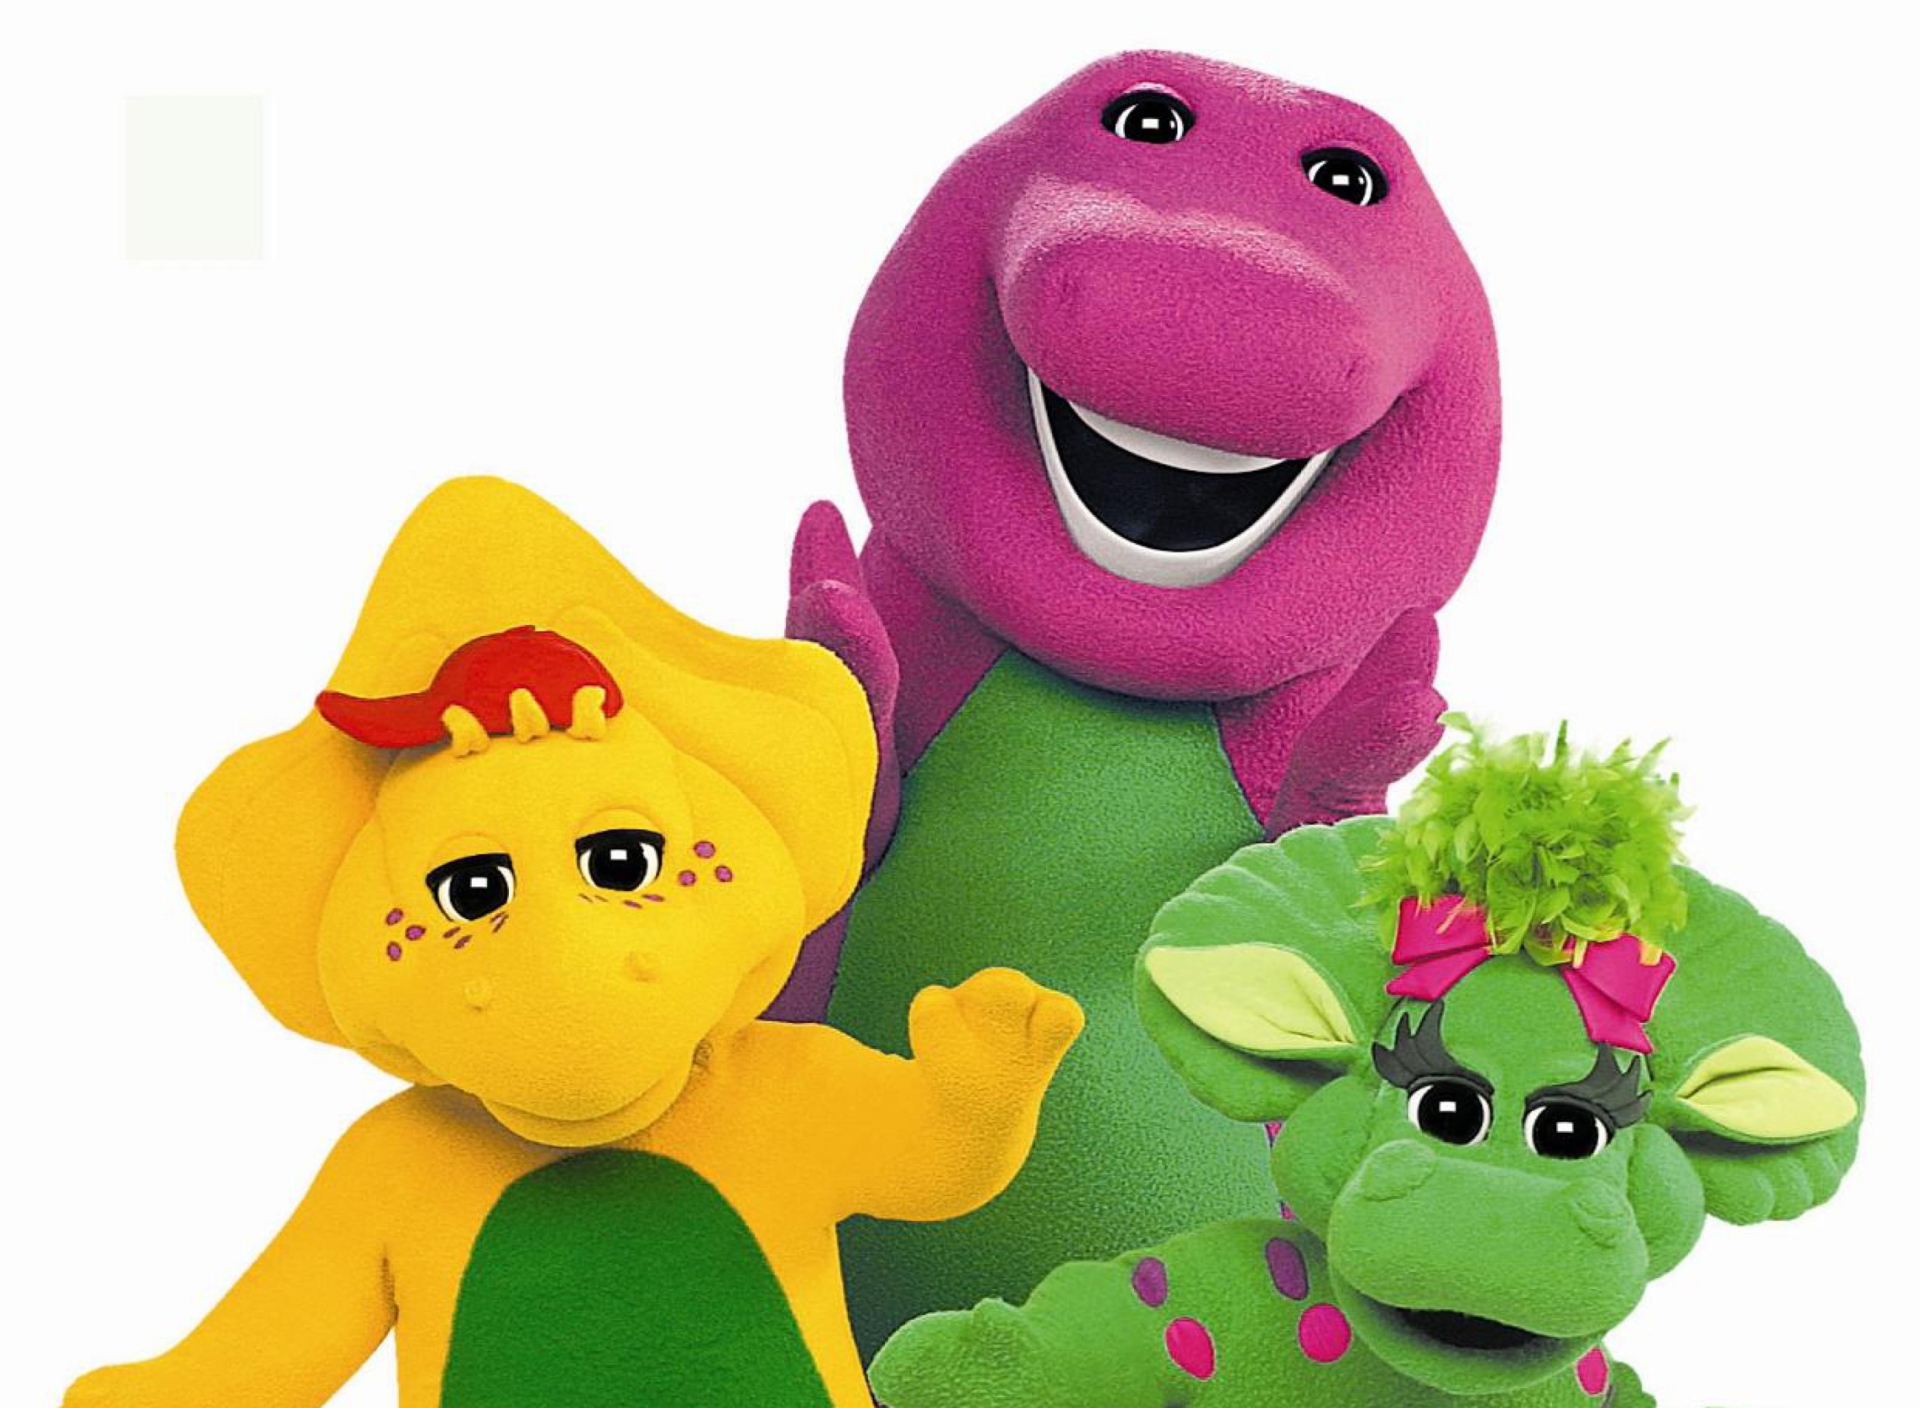 Barney And Friends Wallpaper for Samsung Galaxy S4